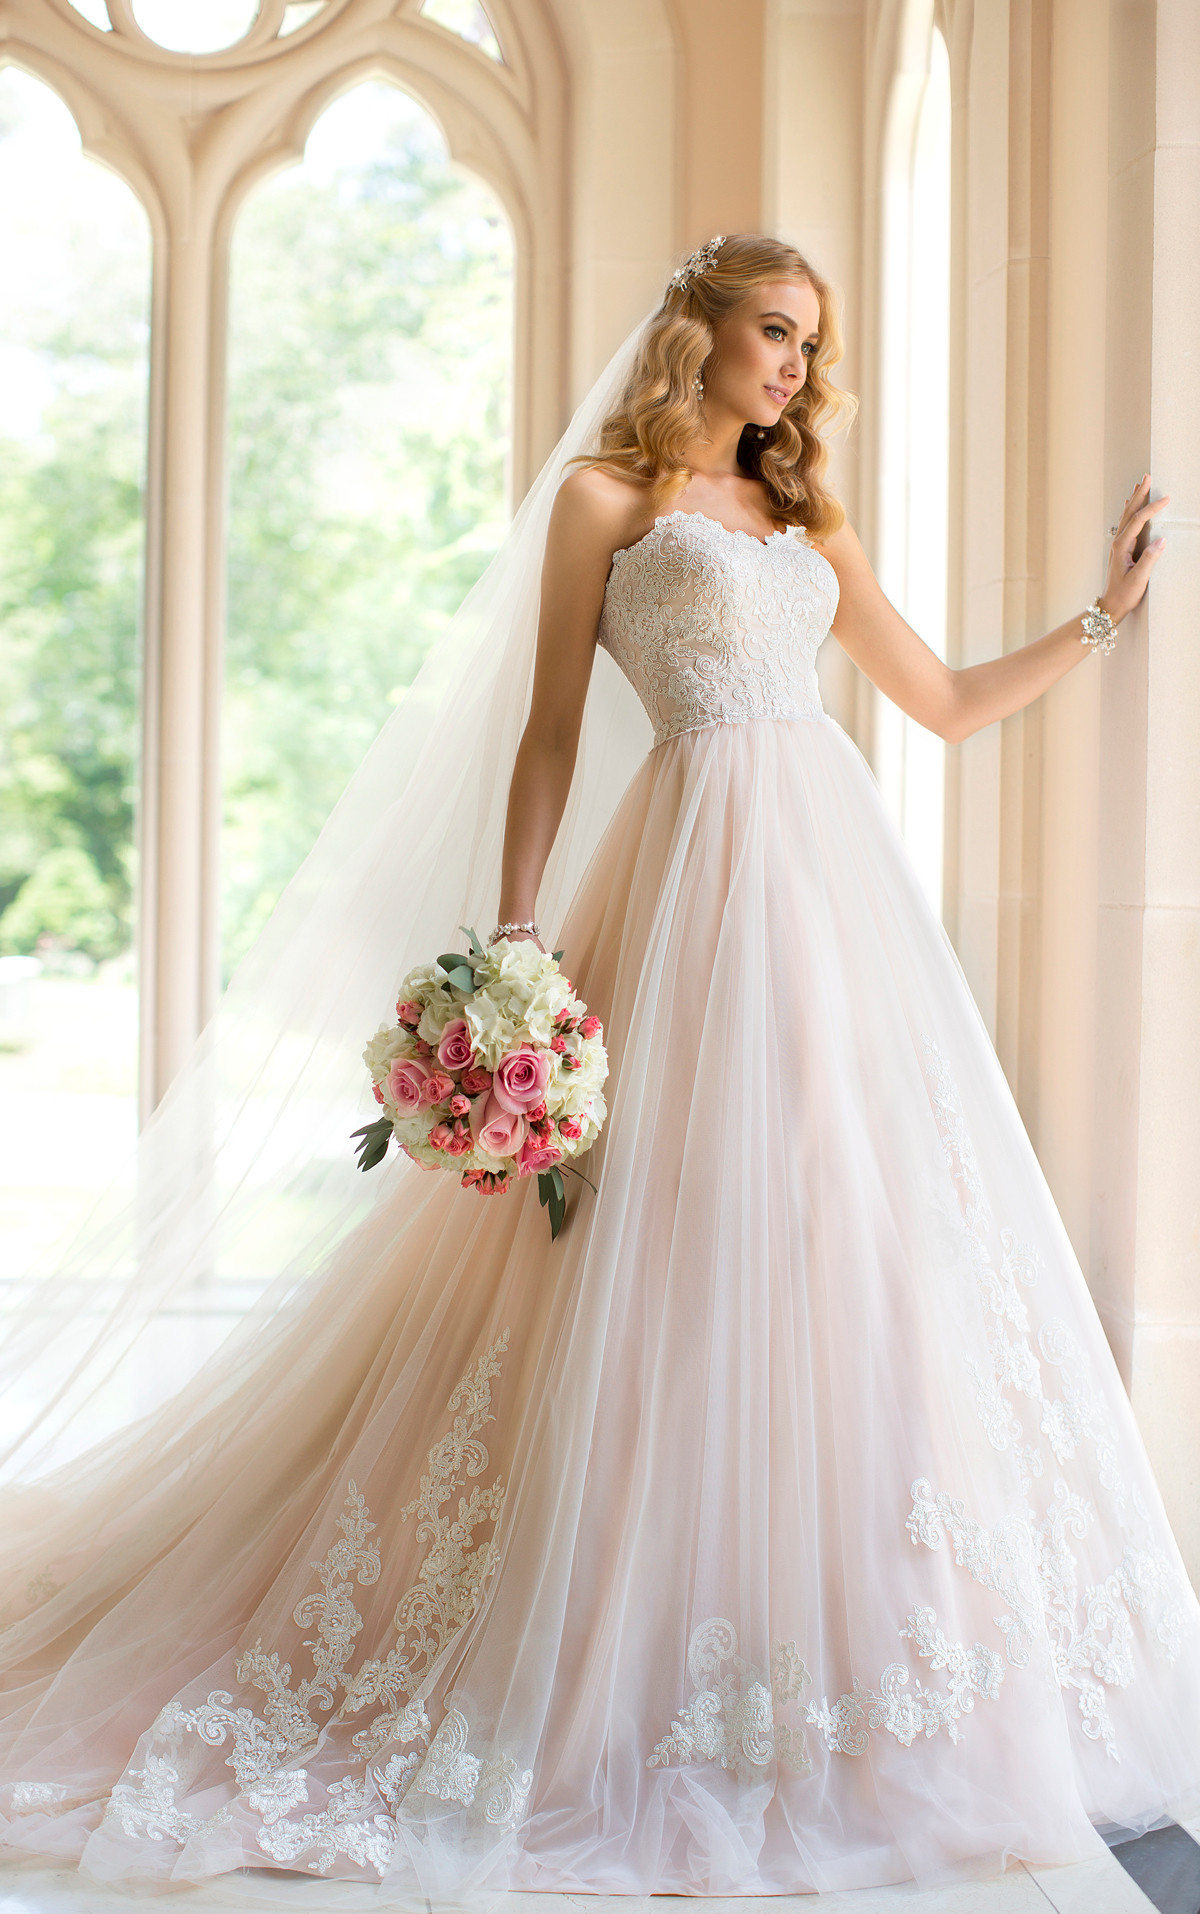 Designer Wedding Dress
 The Best Gowns from The Most In Demand Wedding Dress